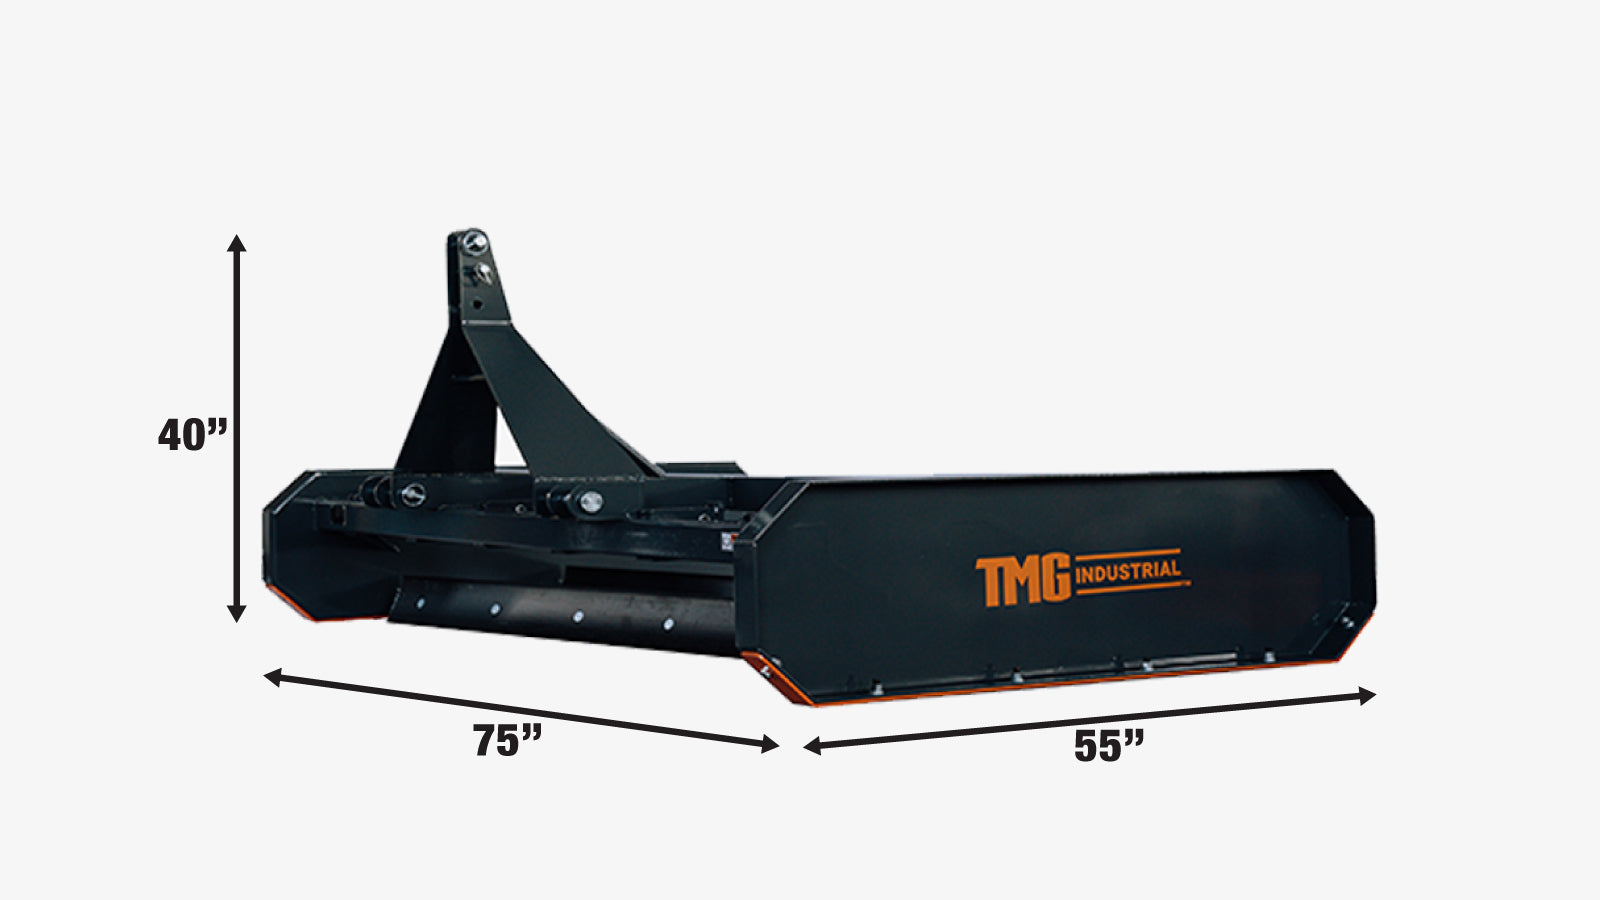 TMG Industrial 72” Tractor Land Leveler, 3-Point Hitch, 70” Grading Width, Adjustable Depth, Double Edge Blades, Category 1 & 2, TMG-TLL72-specifications-image